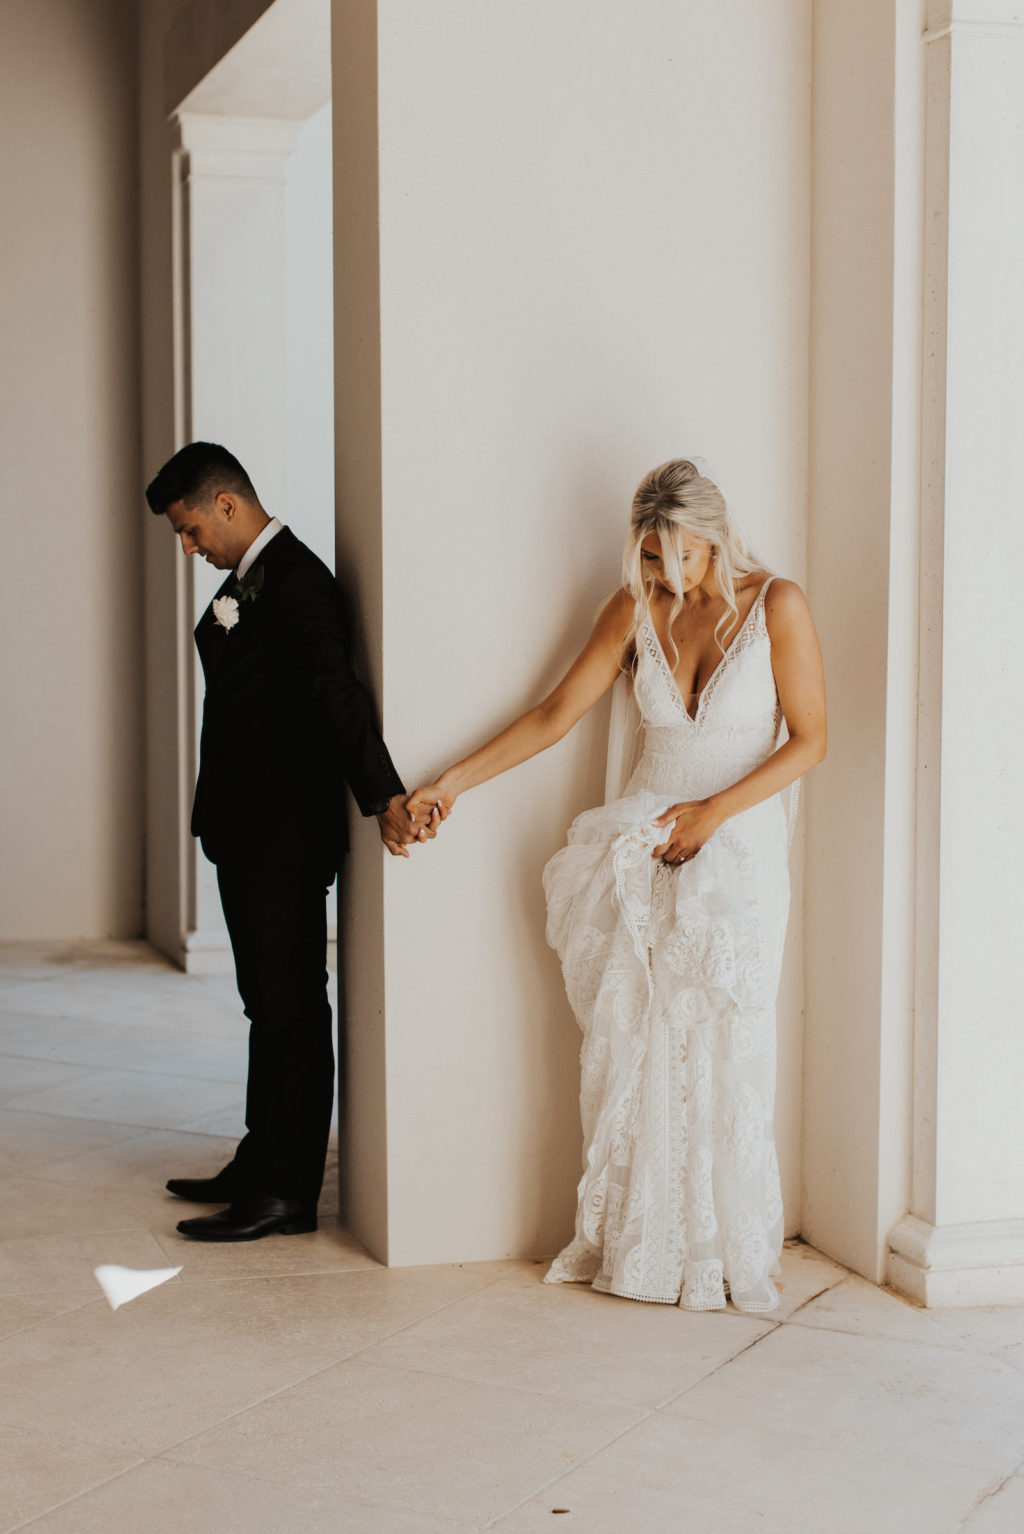 Unique Bride and Groom Holding Hands Behind Wall Secret First Look Wedding Photo